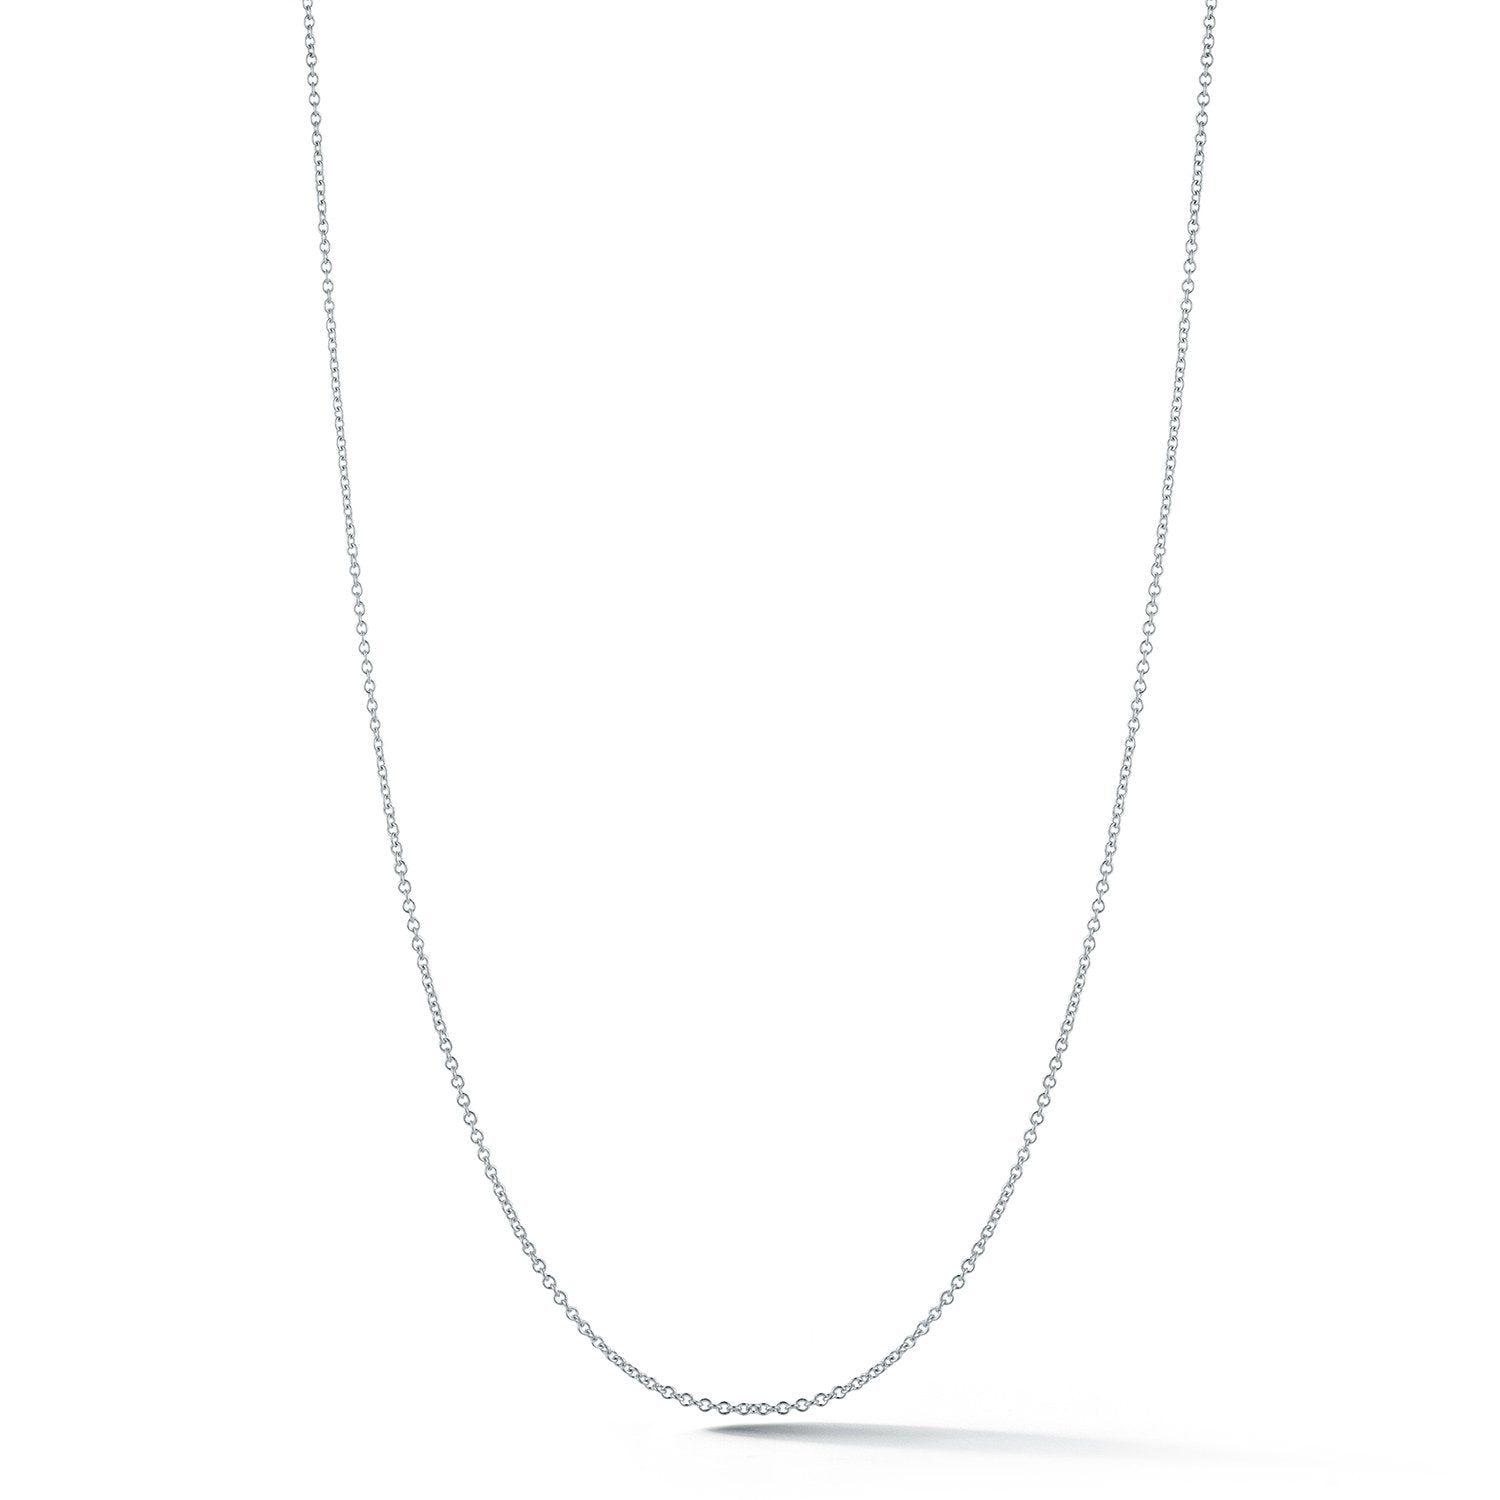 Cable Link Chain Necklace in 18K White Gold